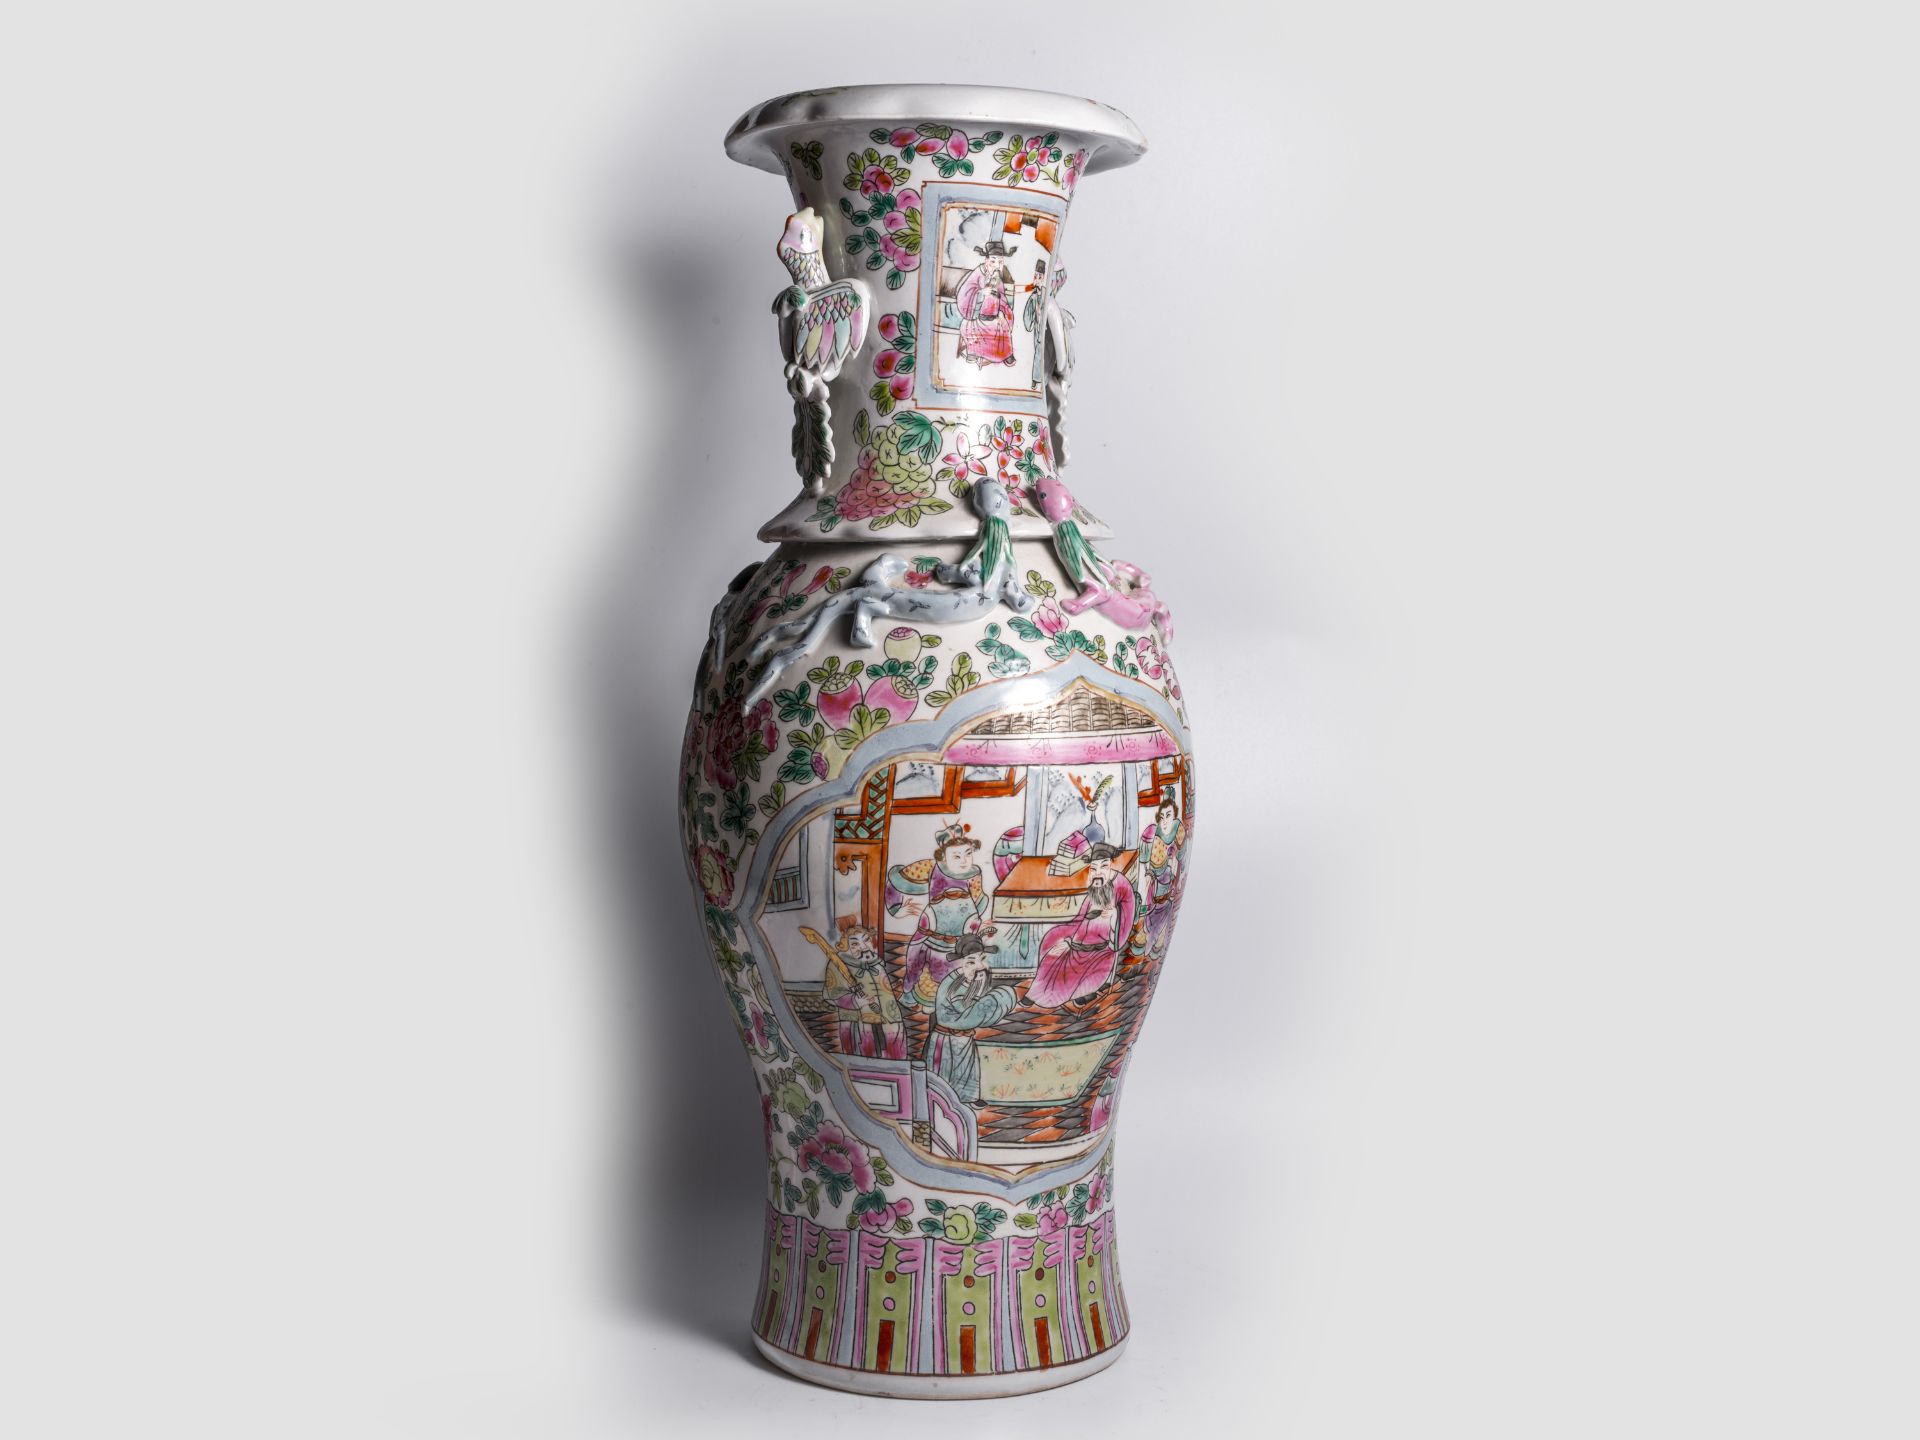 Chinese vase, China, Quing dynasty